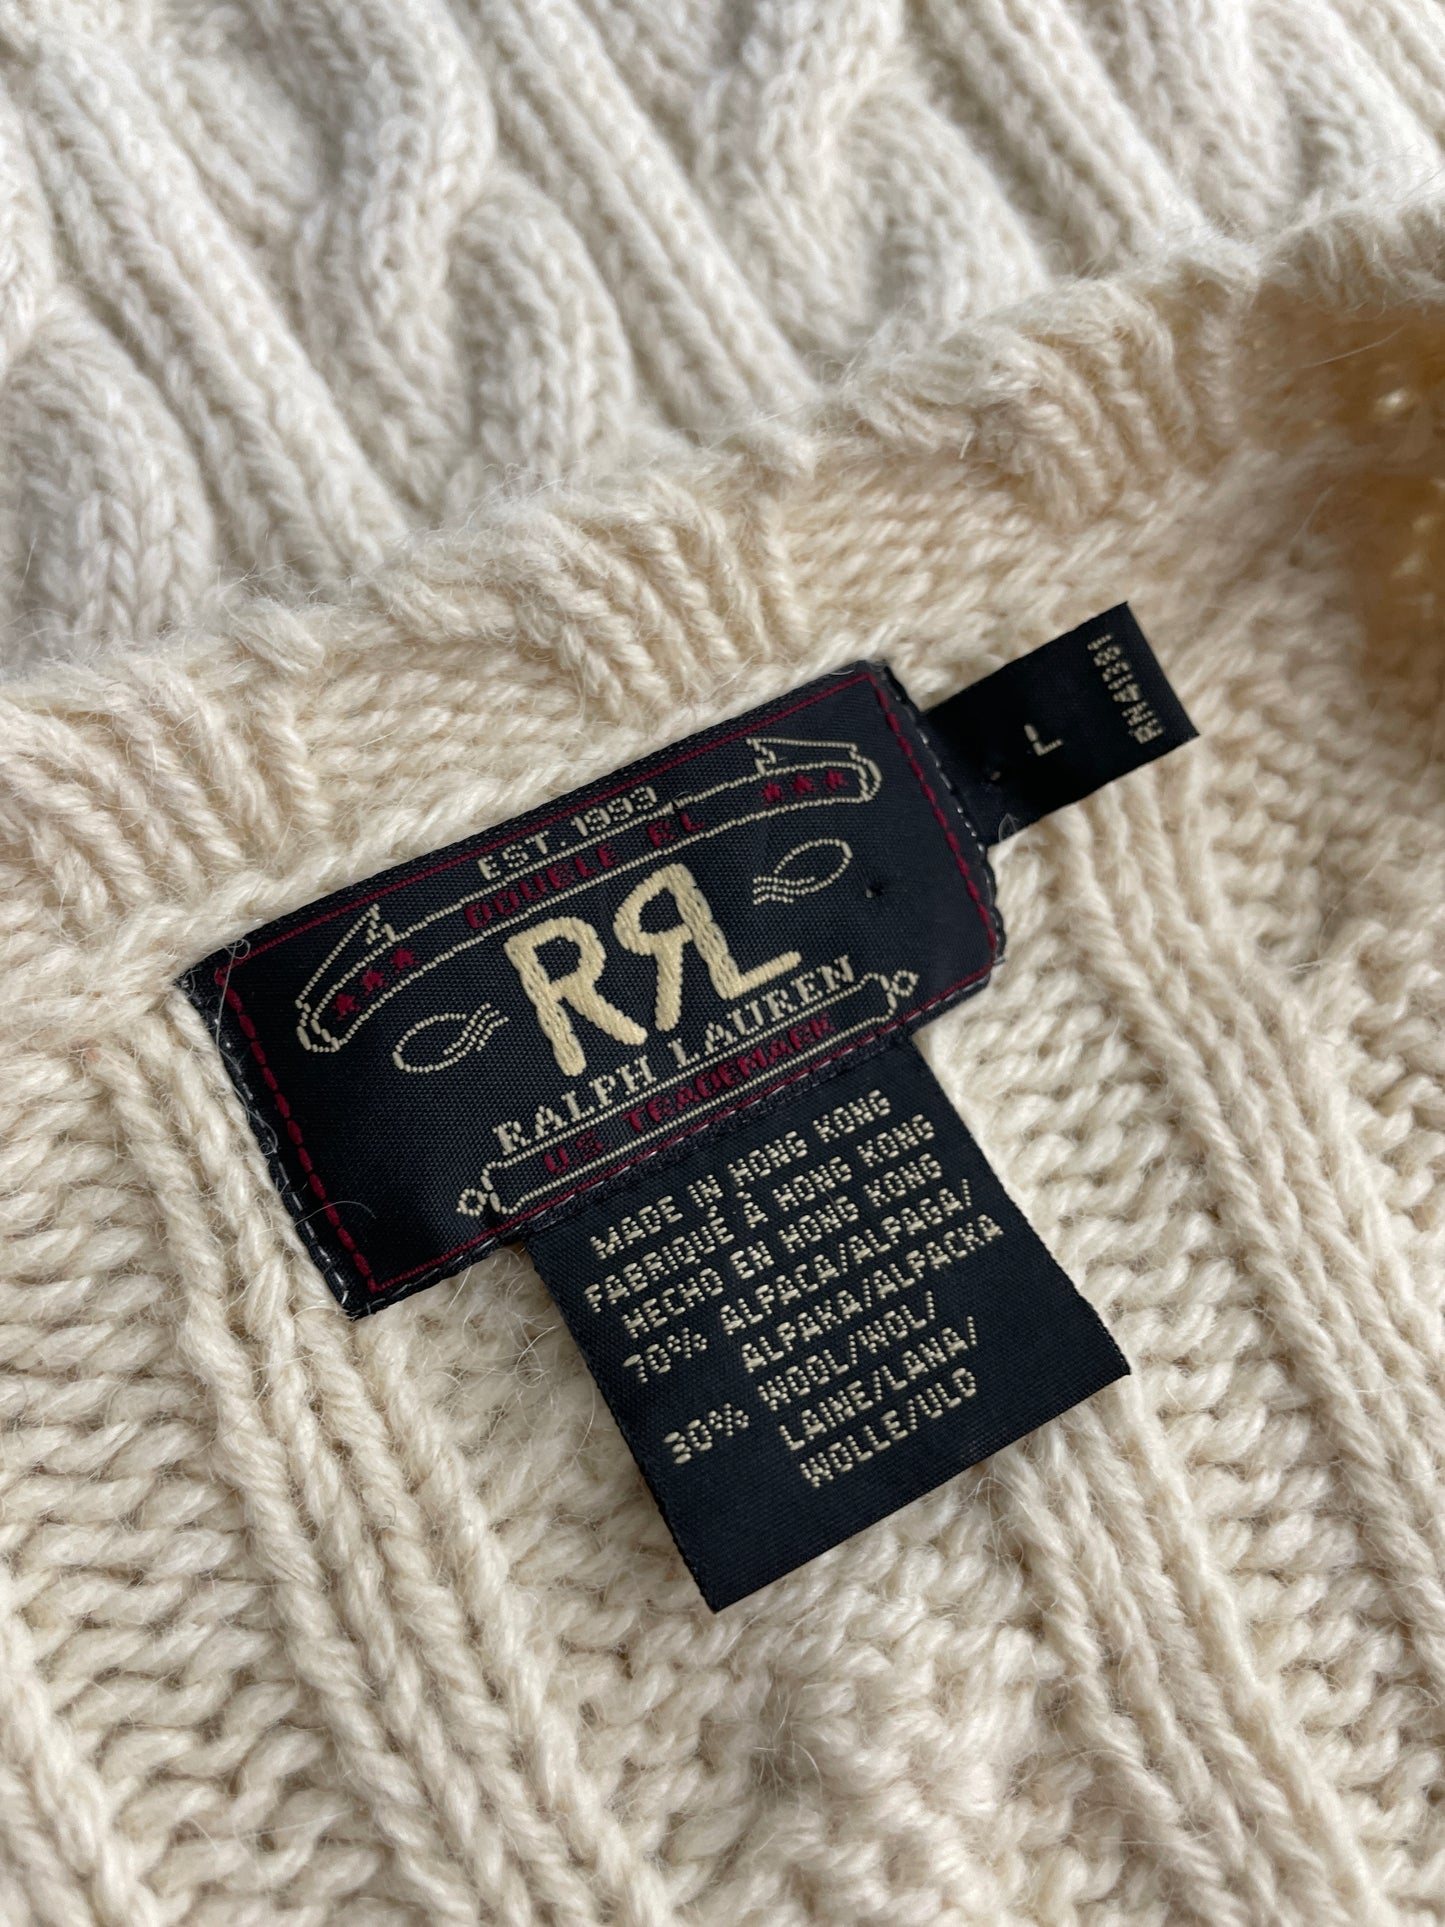 RRL Cable Knit Sweater [XL]